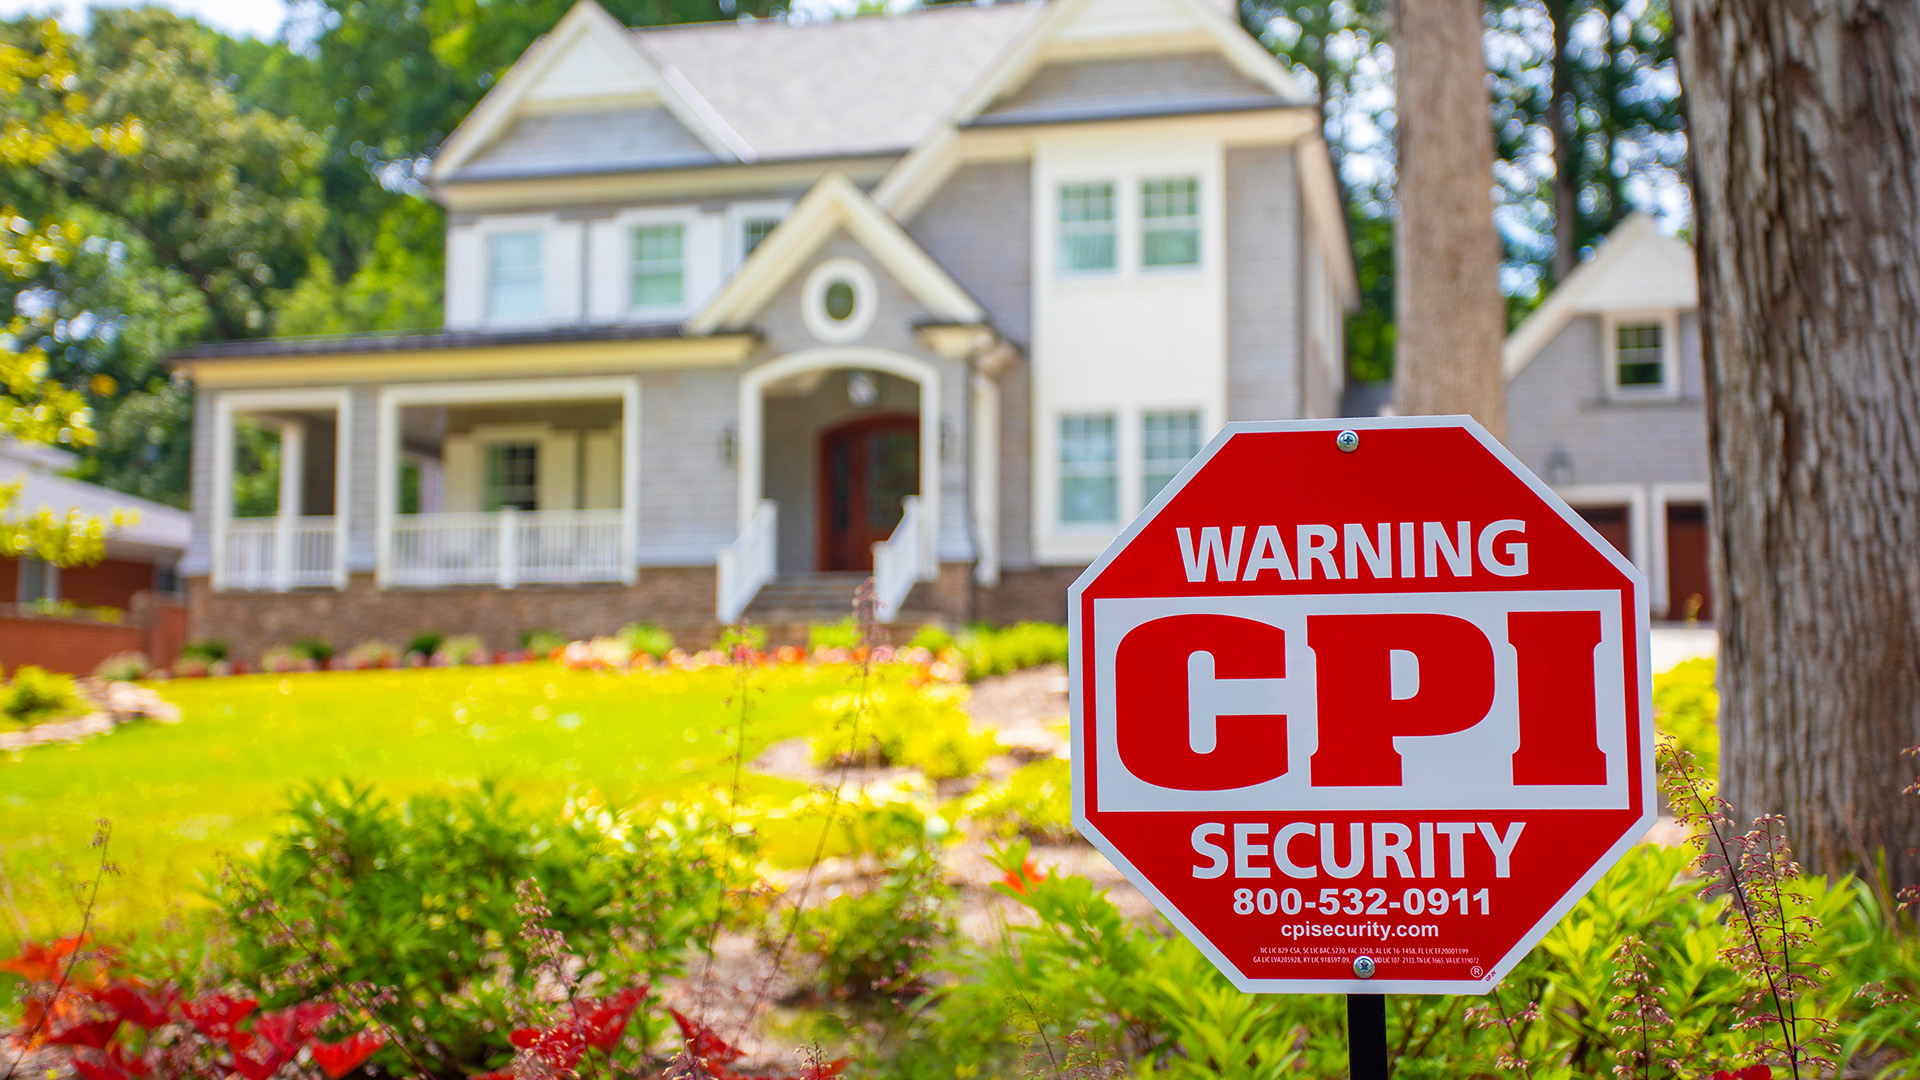 Home Security Tips | CPI Security Blog